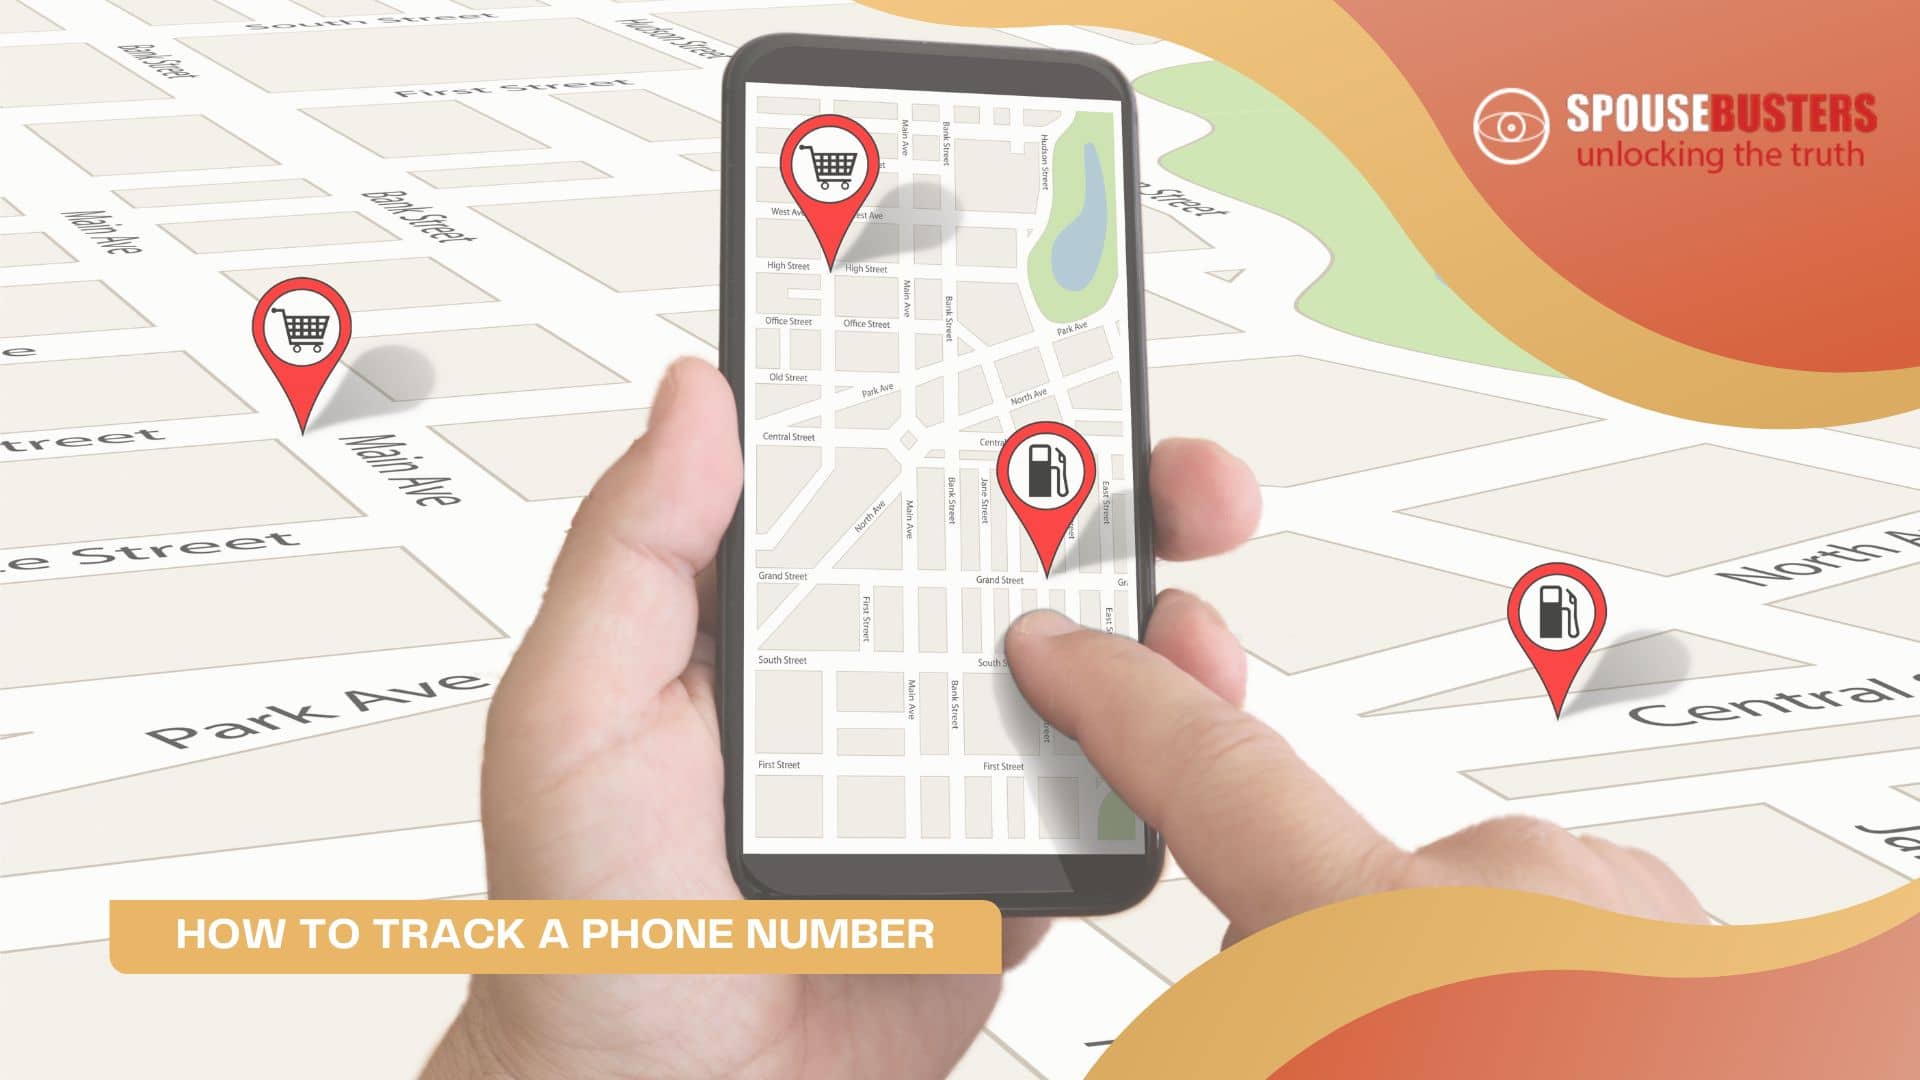 How to Track a Phone Number and Uncover the Truth